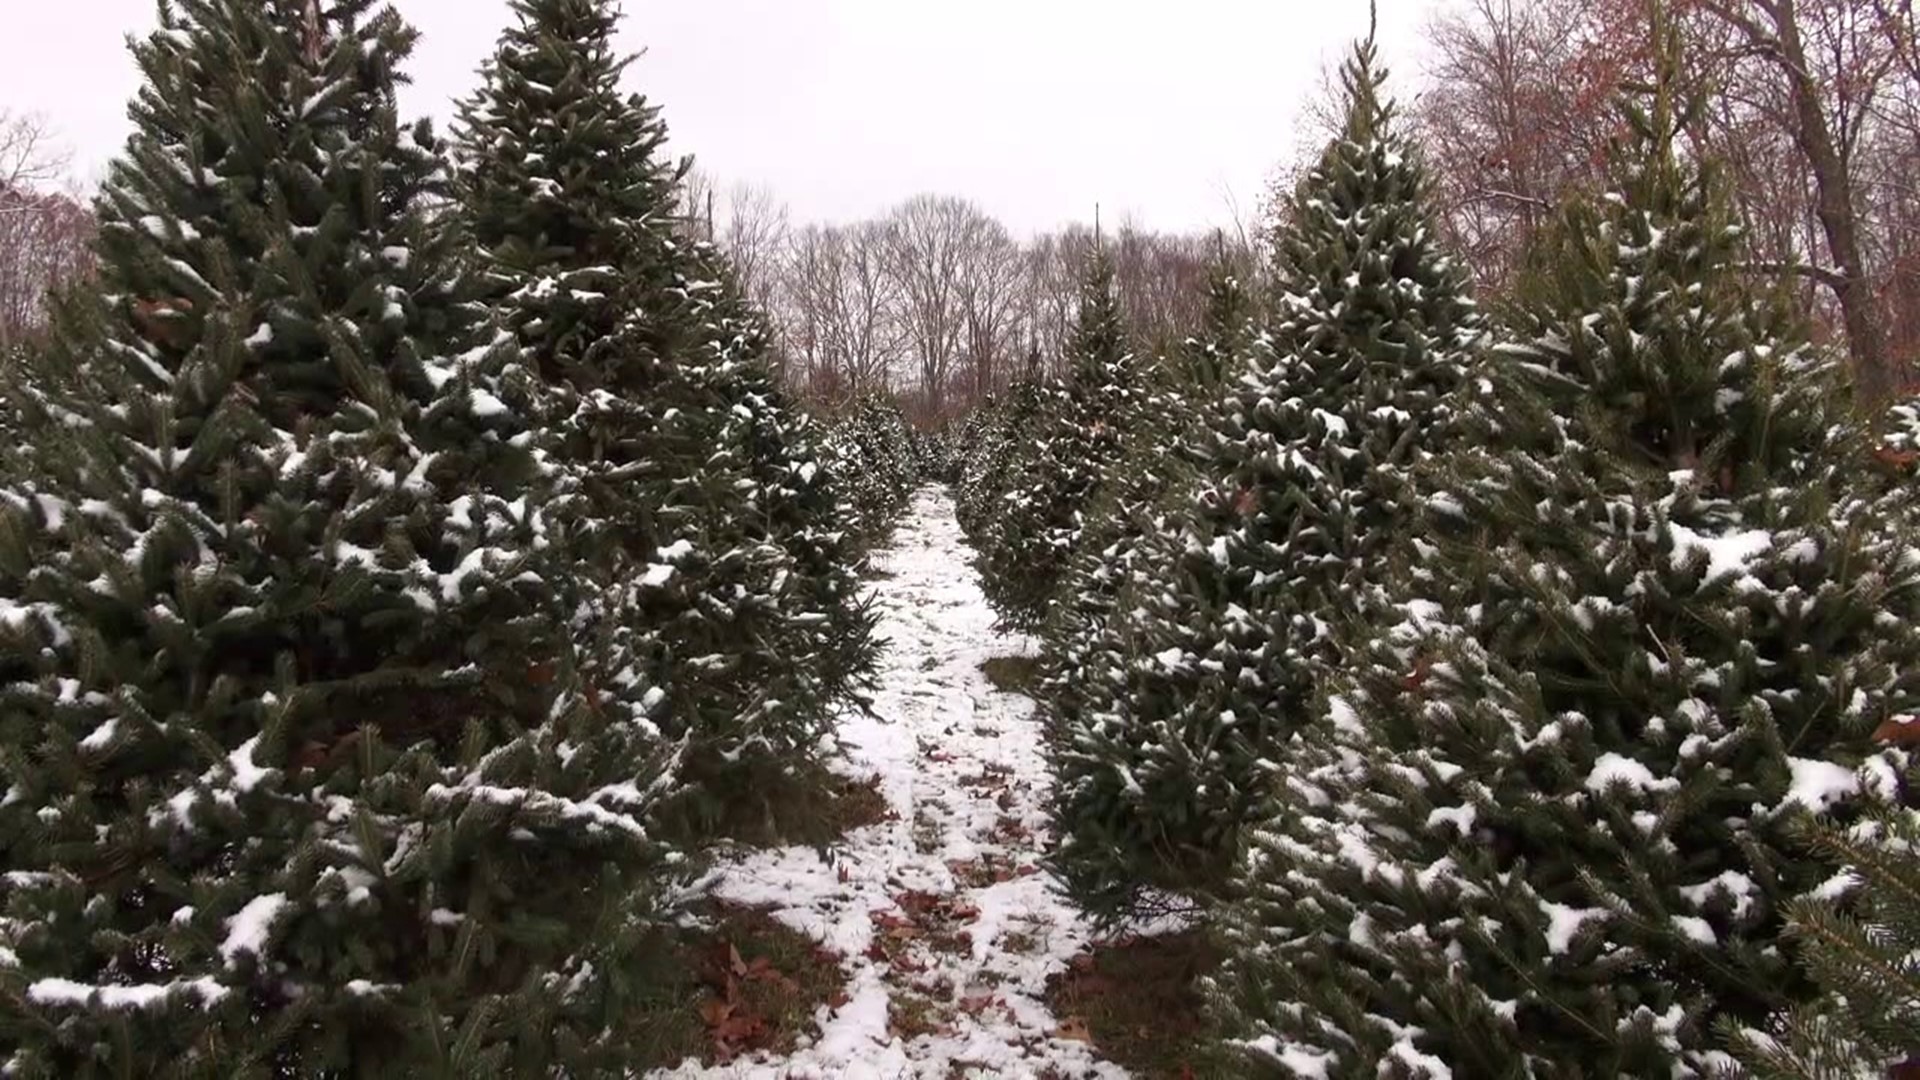 Newswatch 16's Courtney Harrison visited a tree farm in Wyoming County and found people searching for the perfect tree.